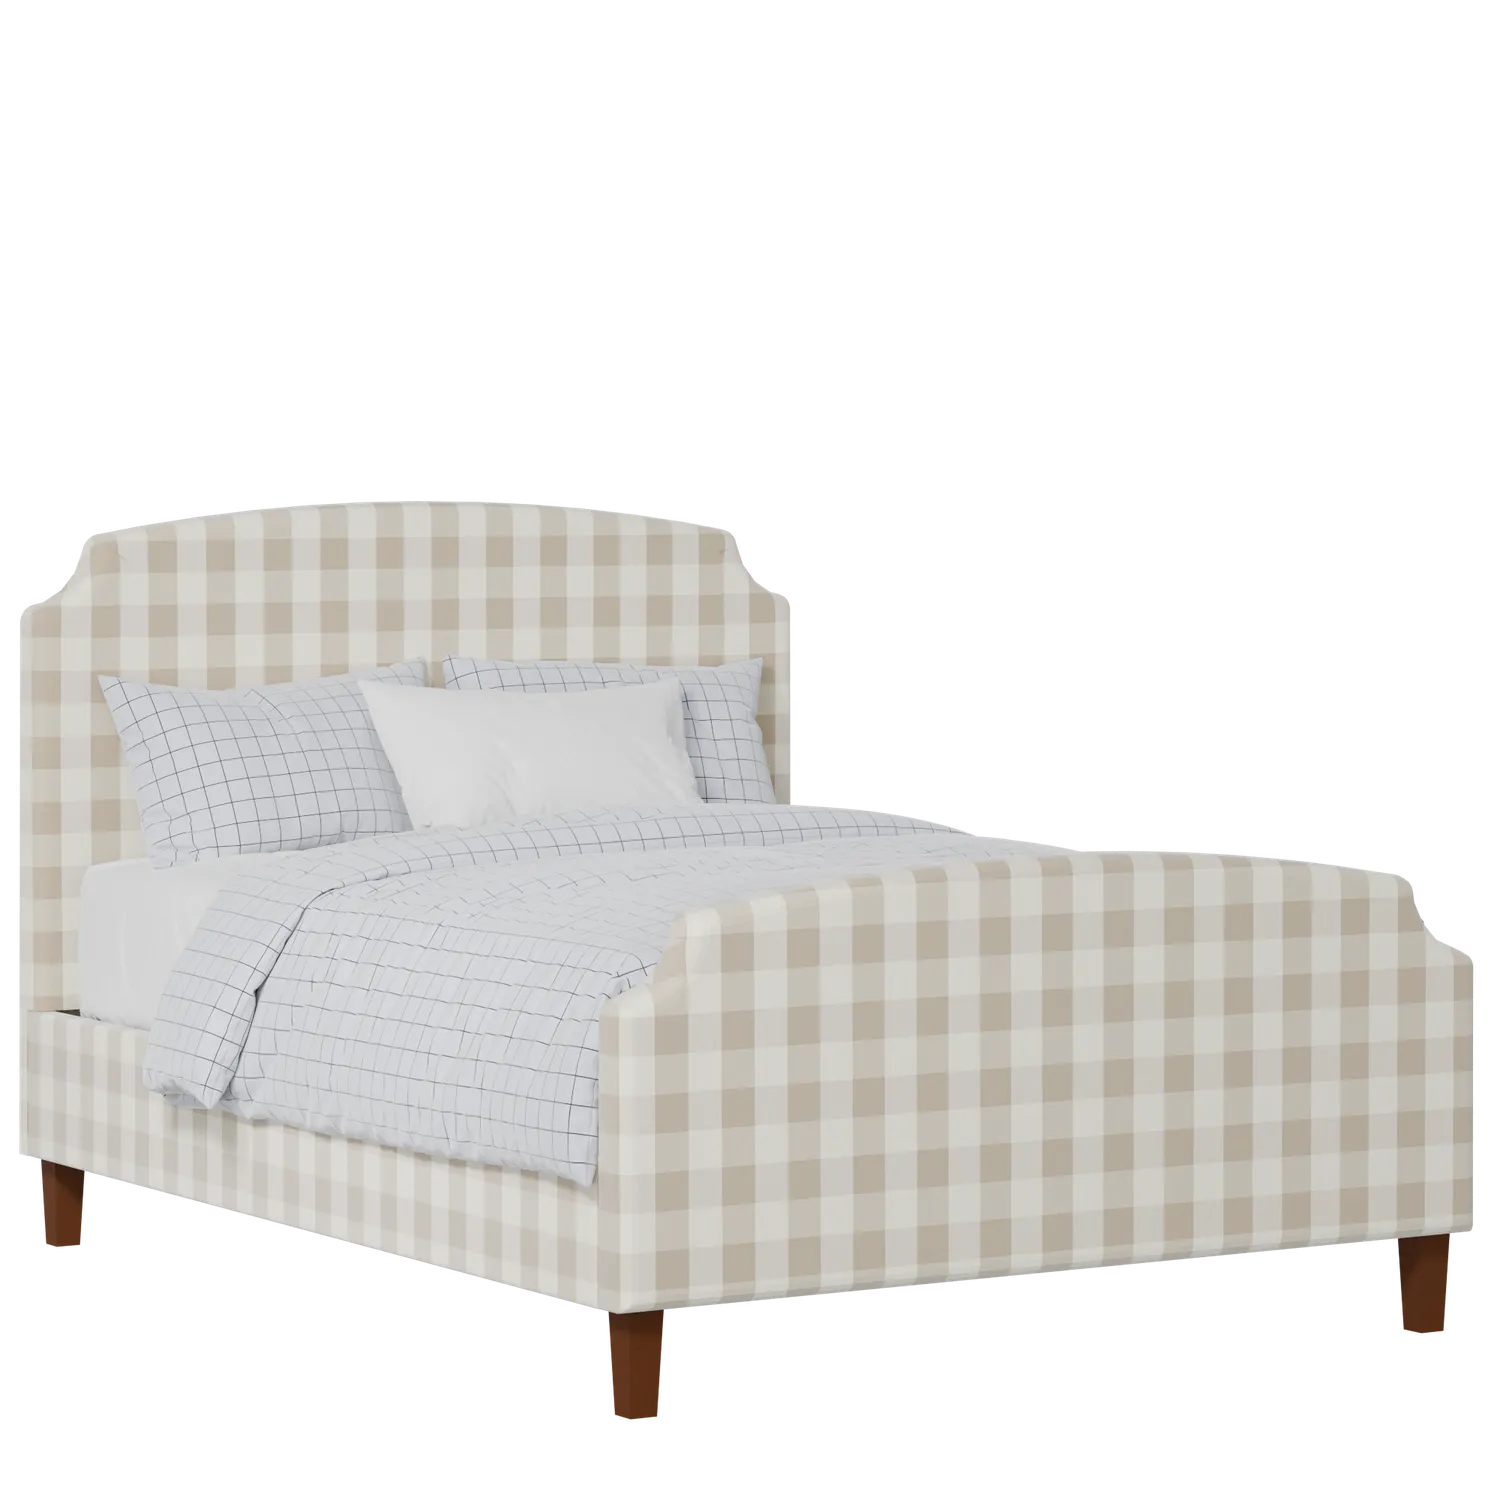 Poole upholstered bed in Romo Kemble Putty fabric with Juno mattress